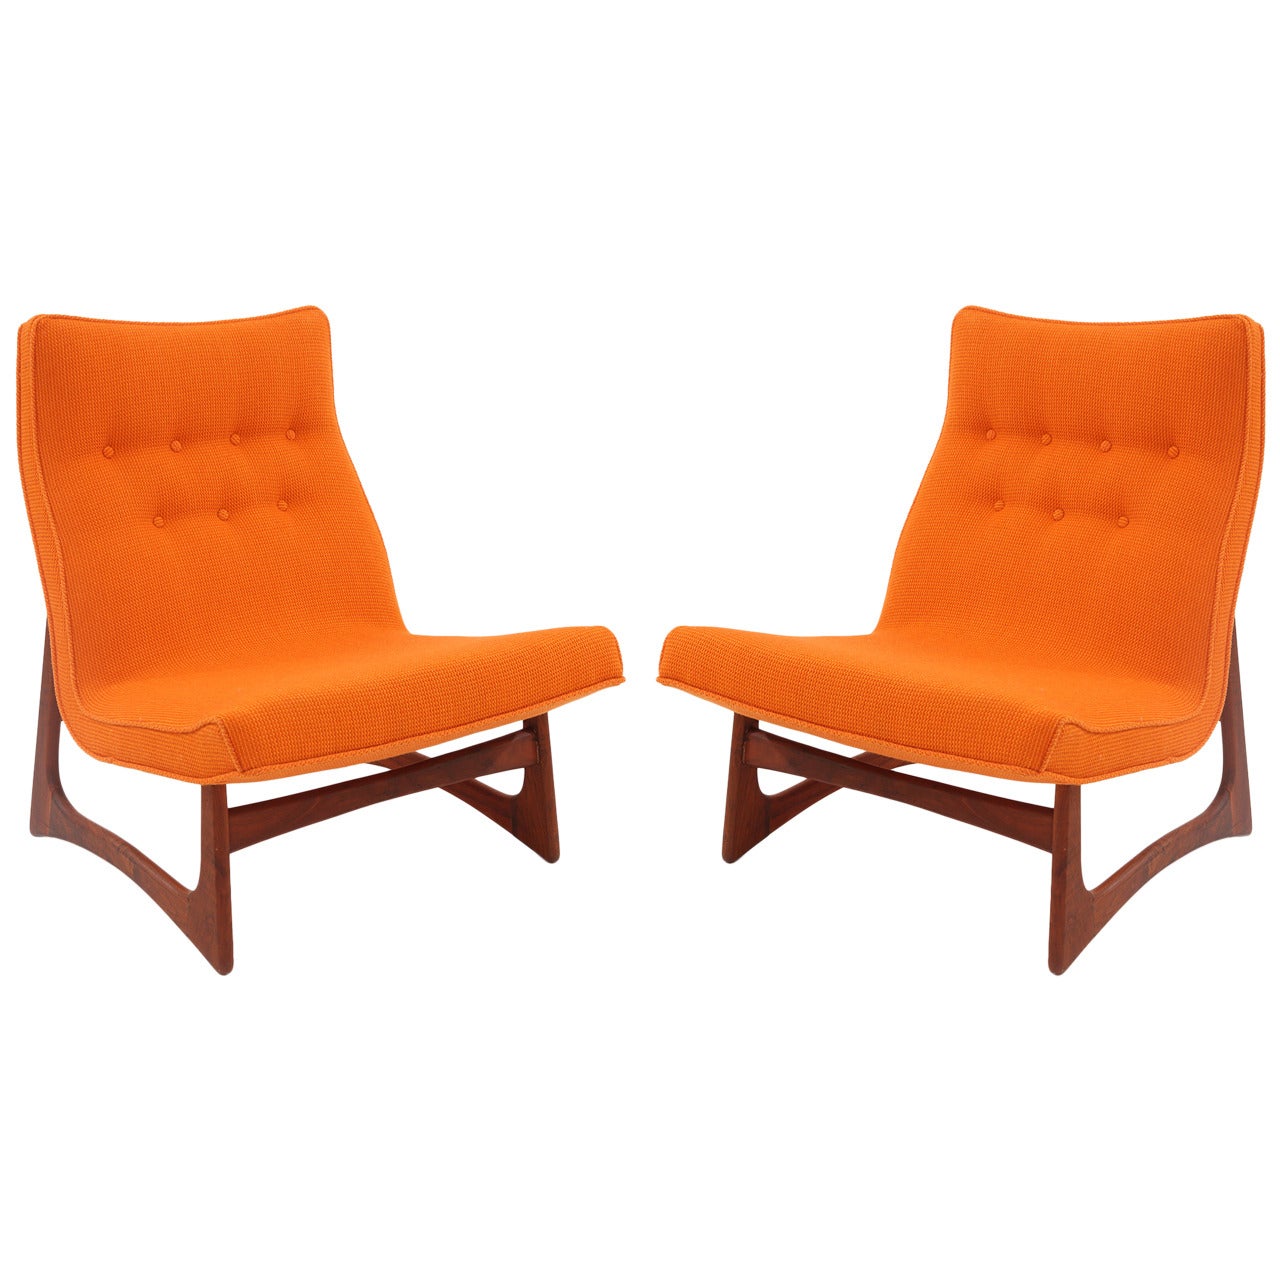 Stunning Large-Scale Lounge Chairs by Adrian Pearsall